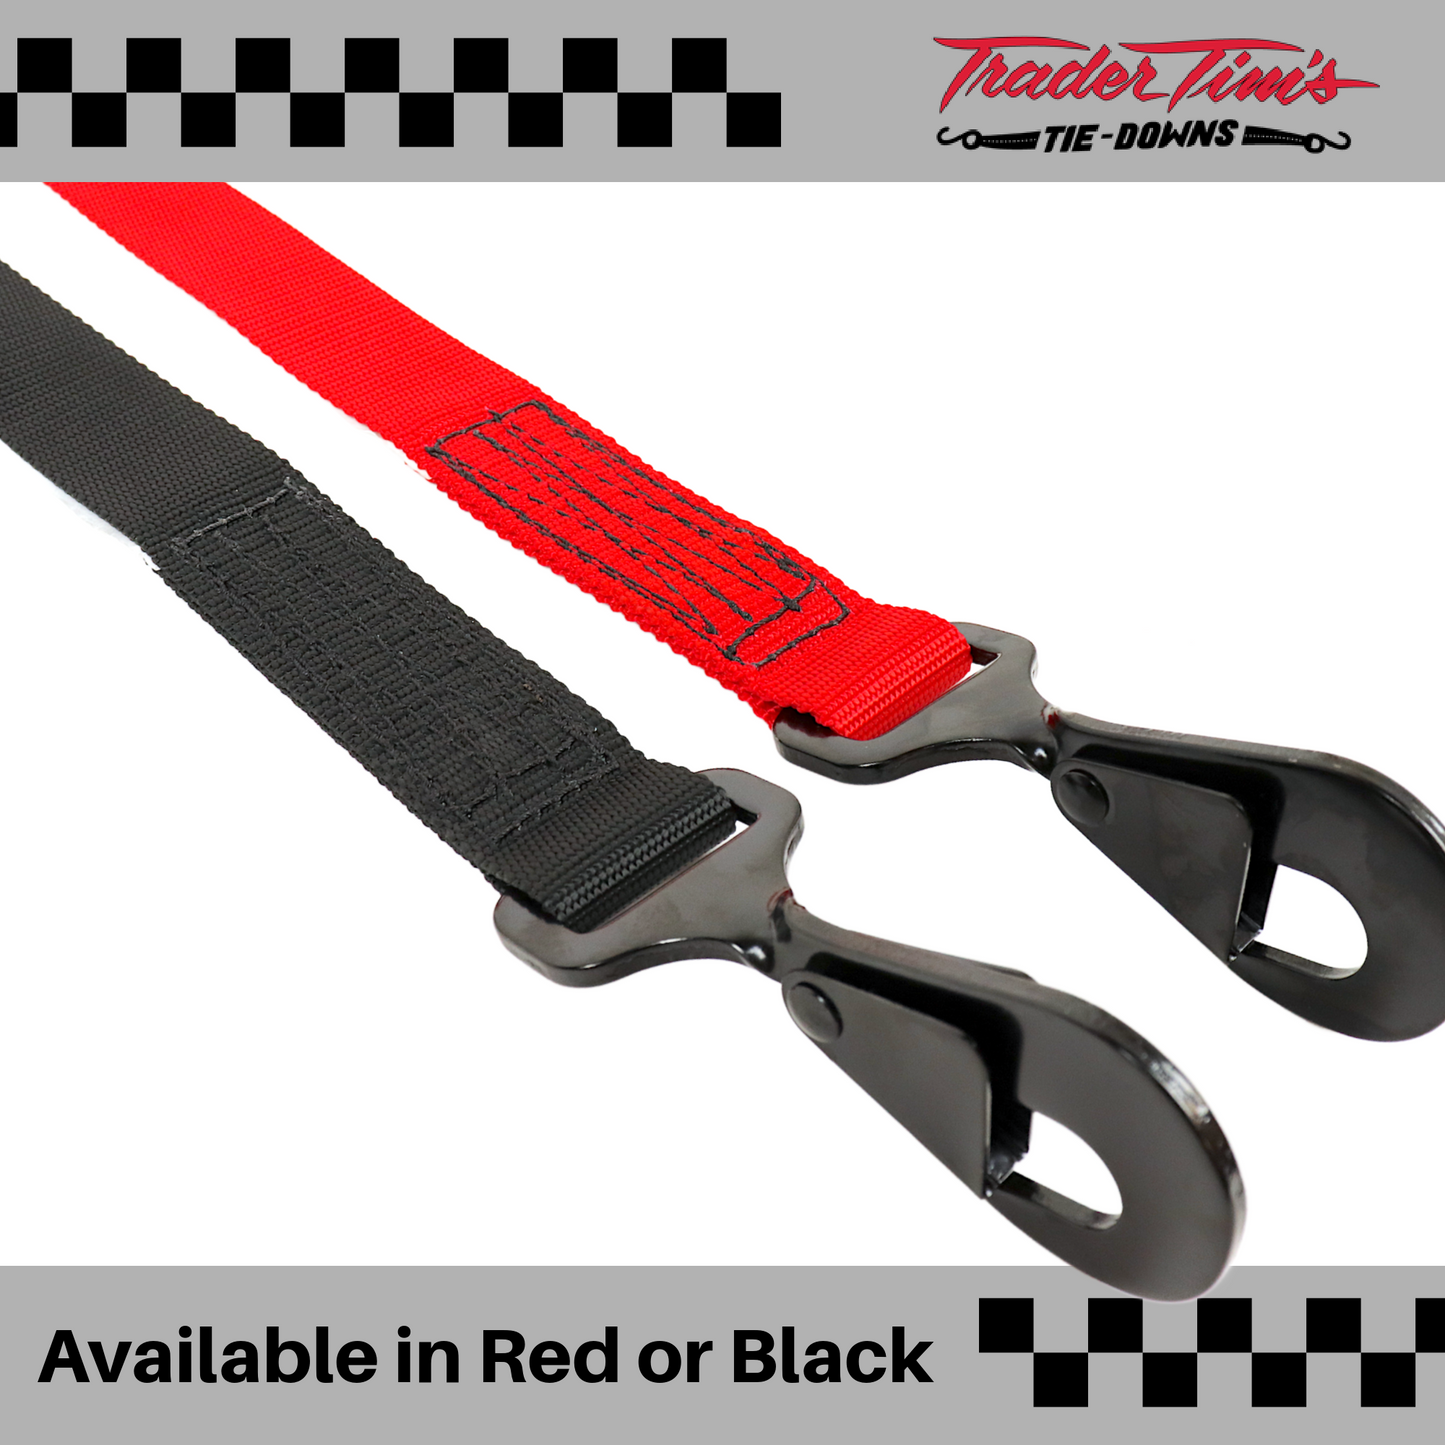 1.5” x 6' Through the Tire Hold Down - Red or Black